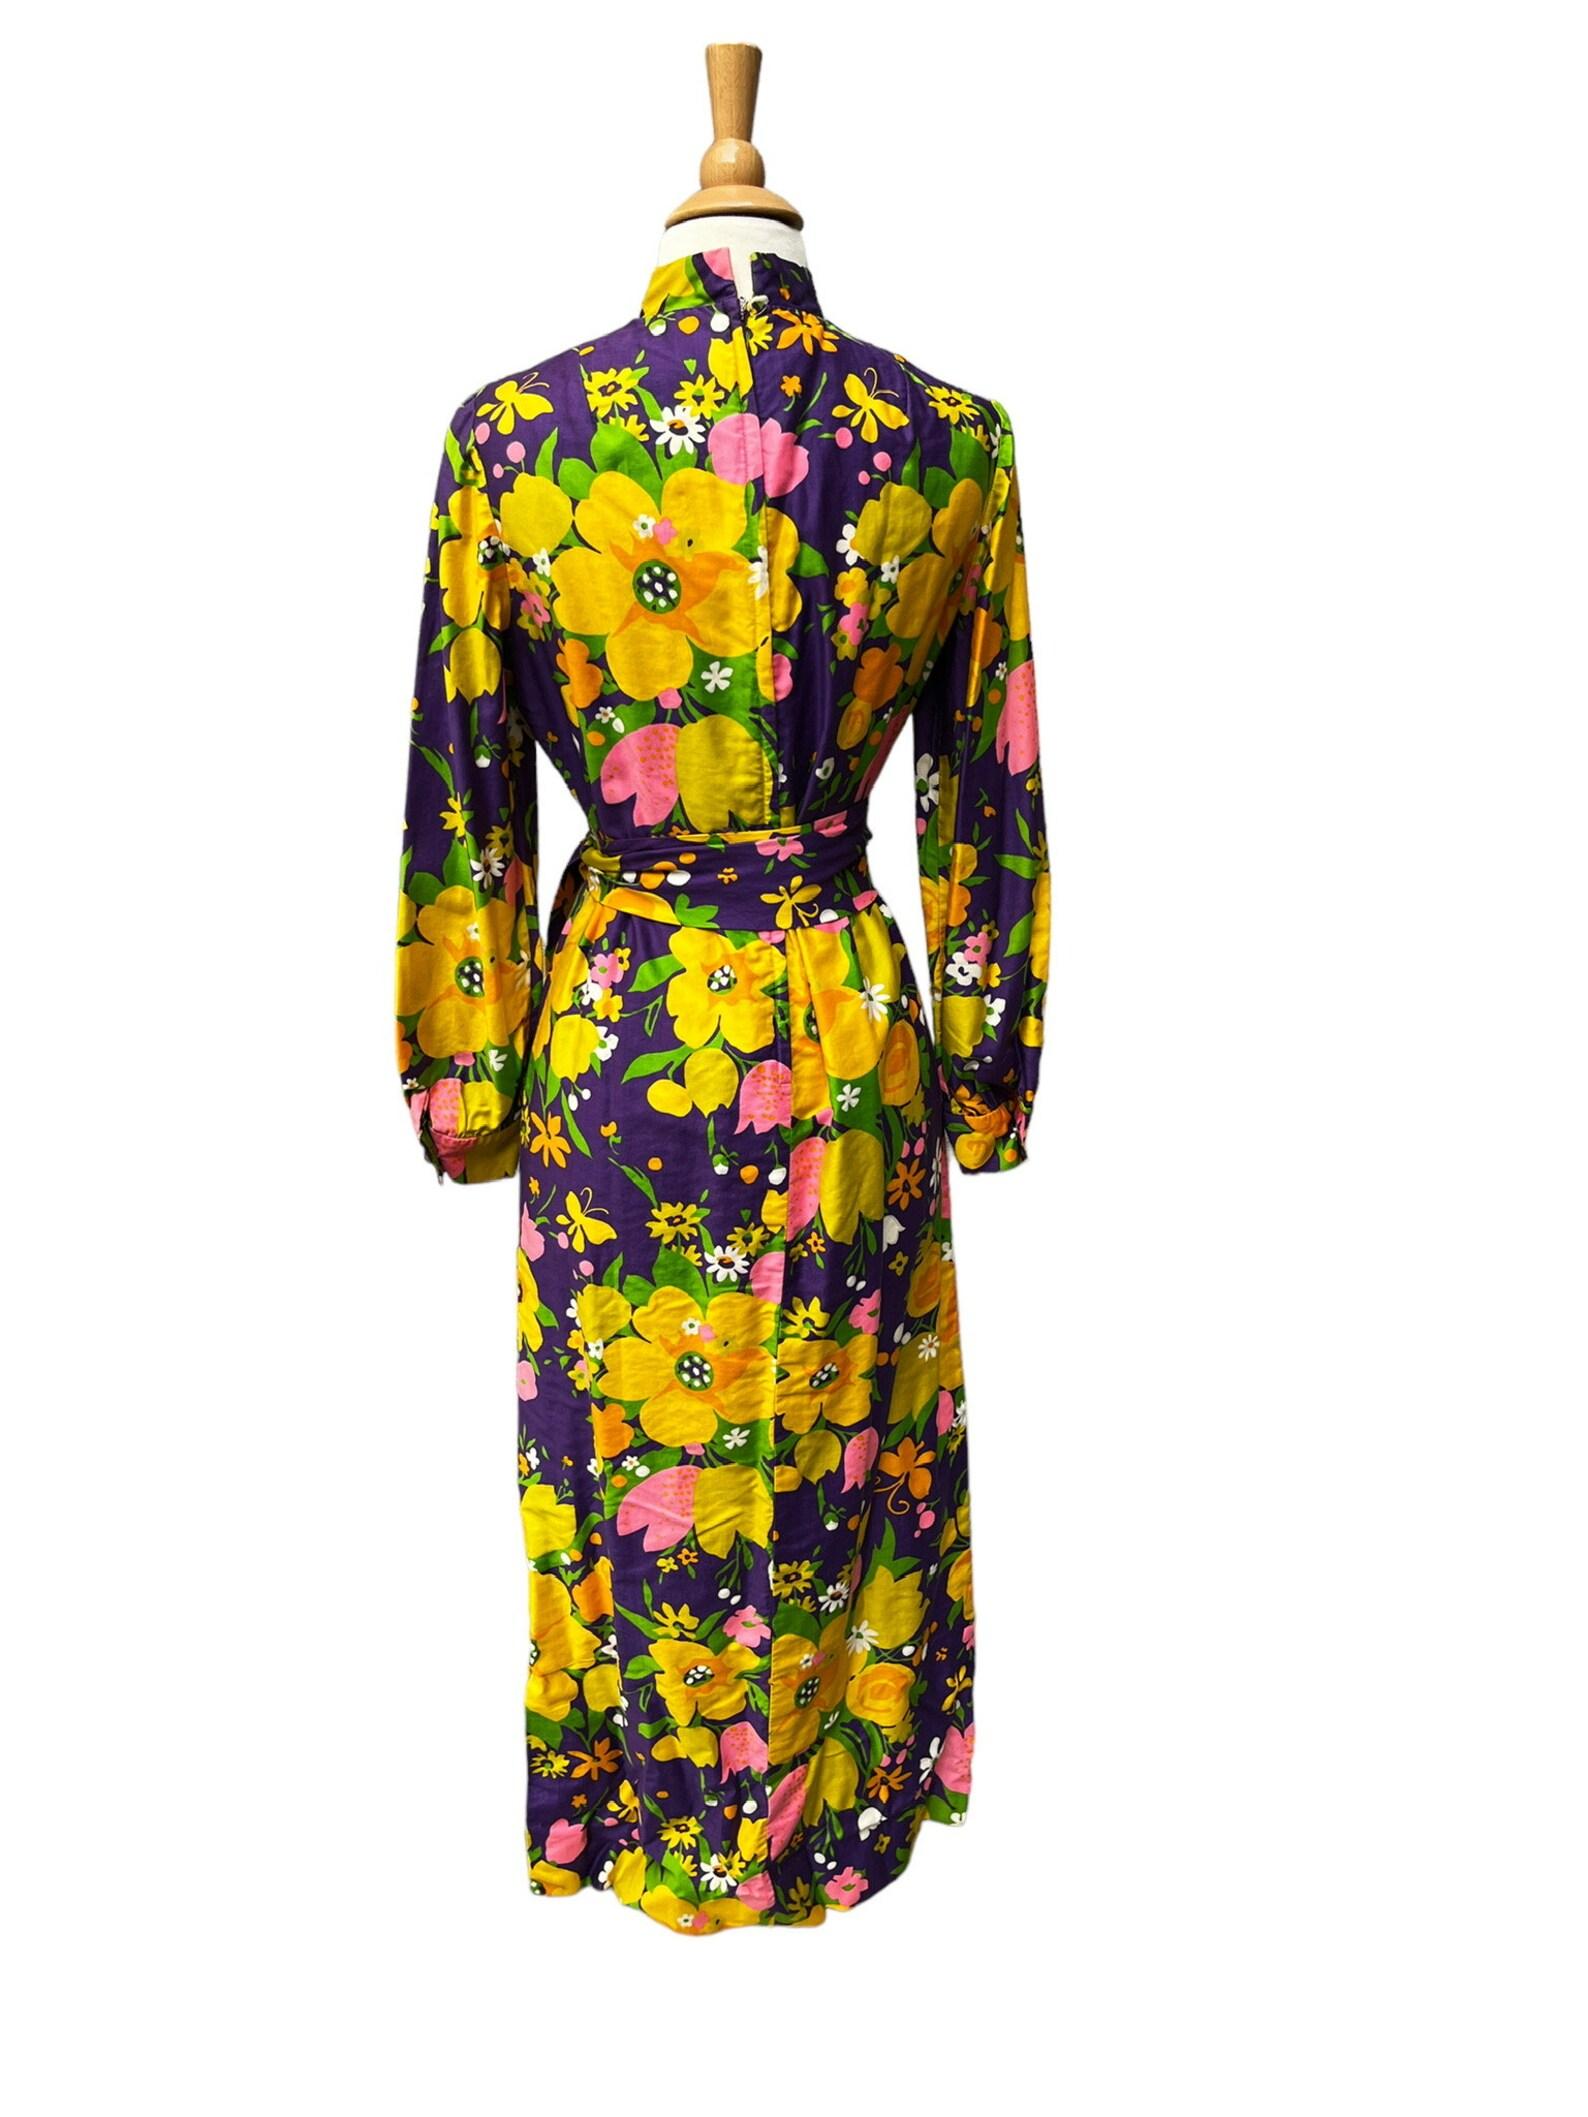 Brenner Couture Floral Maxi Dress, Circa 1970s For Sale 2